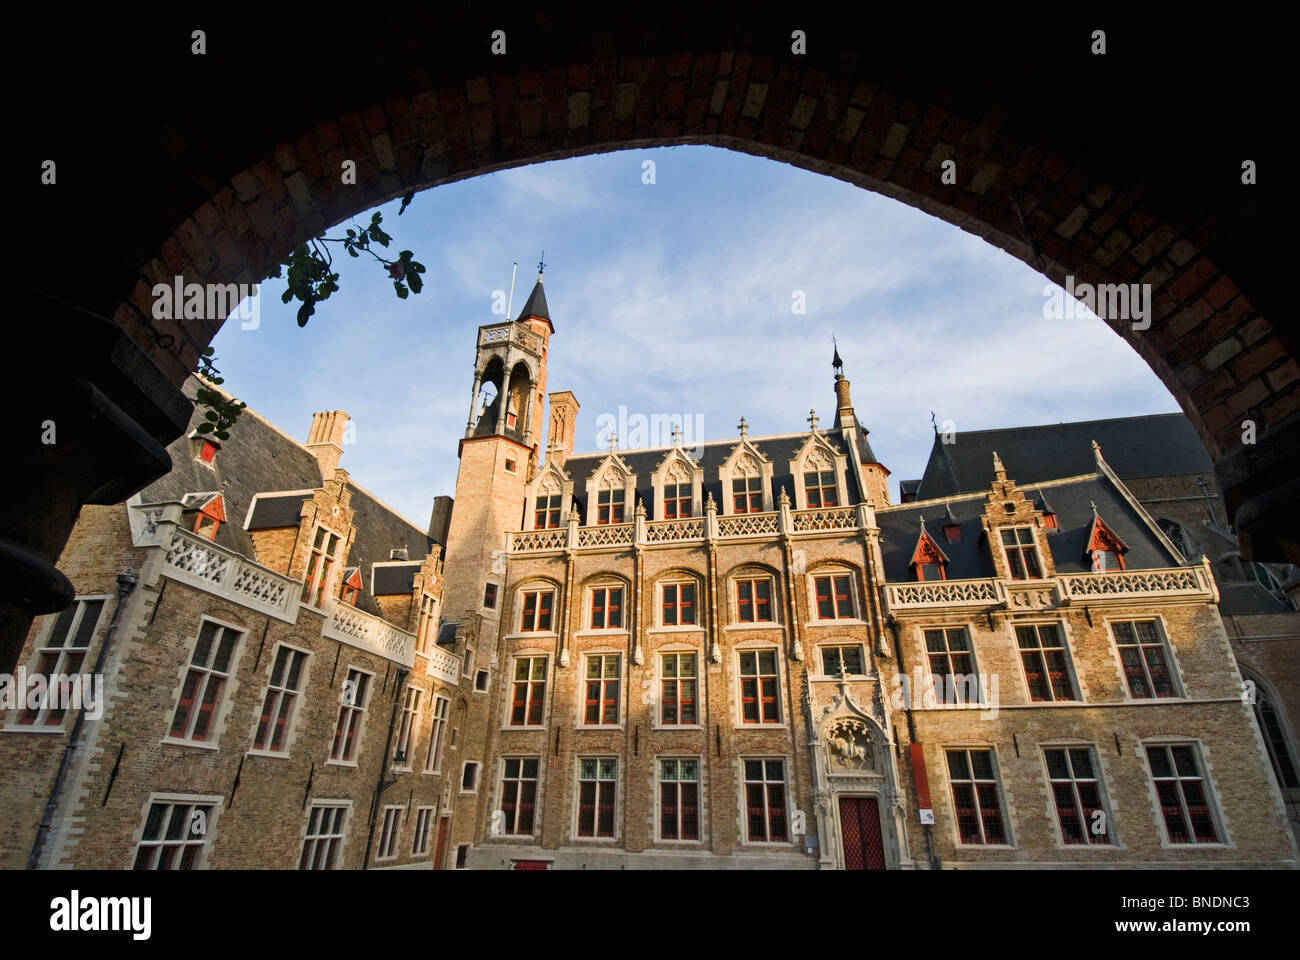 Belgium, Bruges, Church of Our Lady, Onze Lieve Vrouwekerk, Courtyard Stock Photo